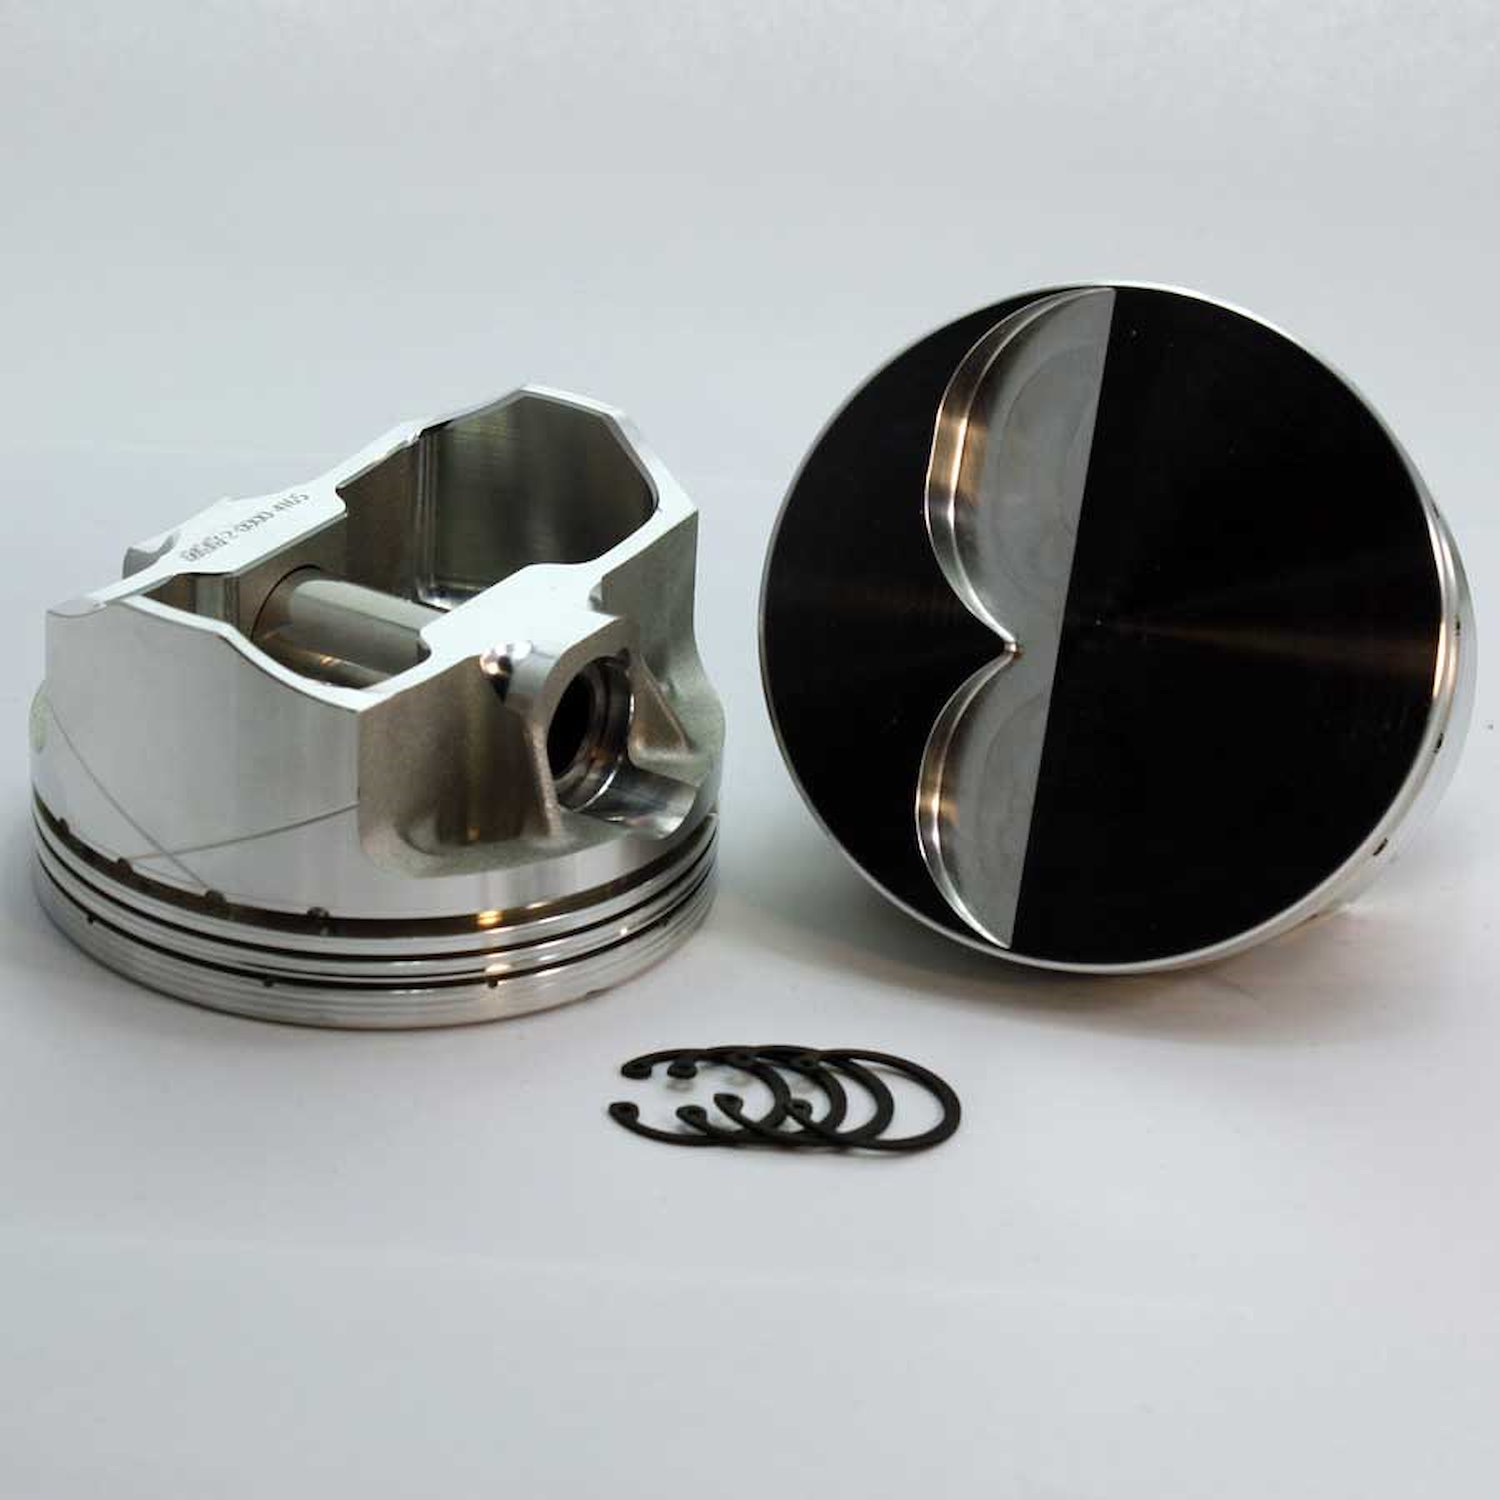 1-3500-4030D FX-Series Flat Top Piston Set for 1962-2001 Small Block Ford 289, 4.030 in. Bore, -4cc Volume [OEM Stroke]